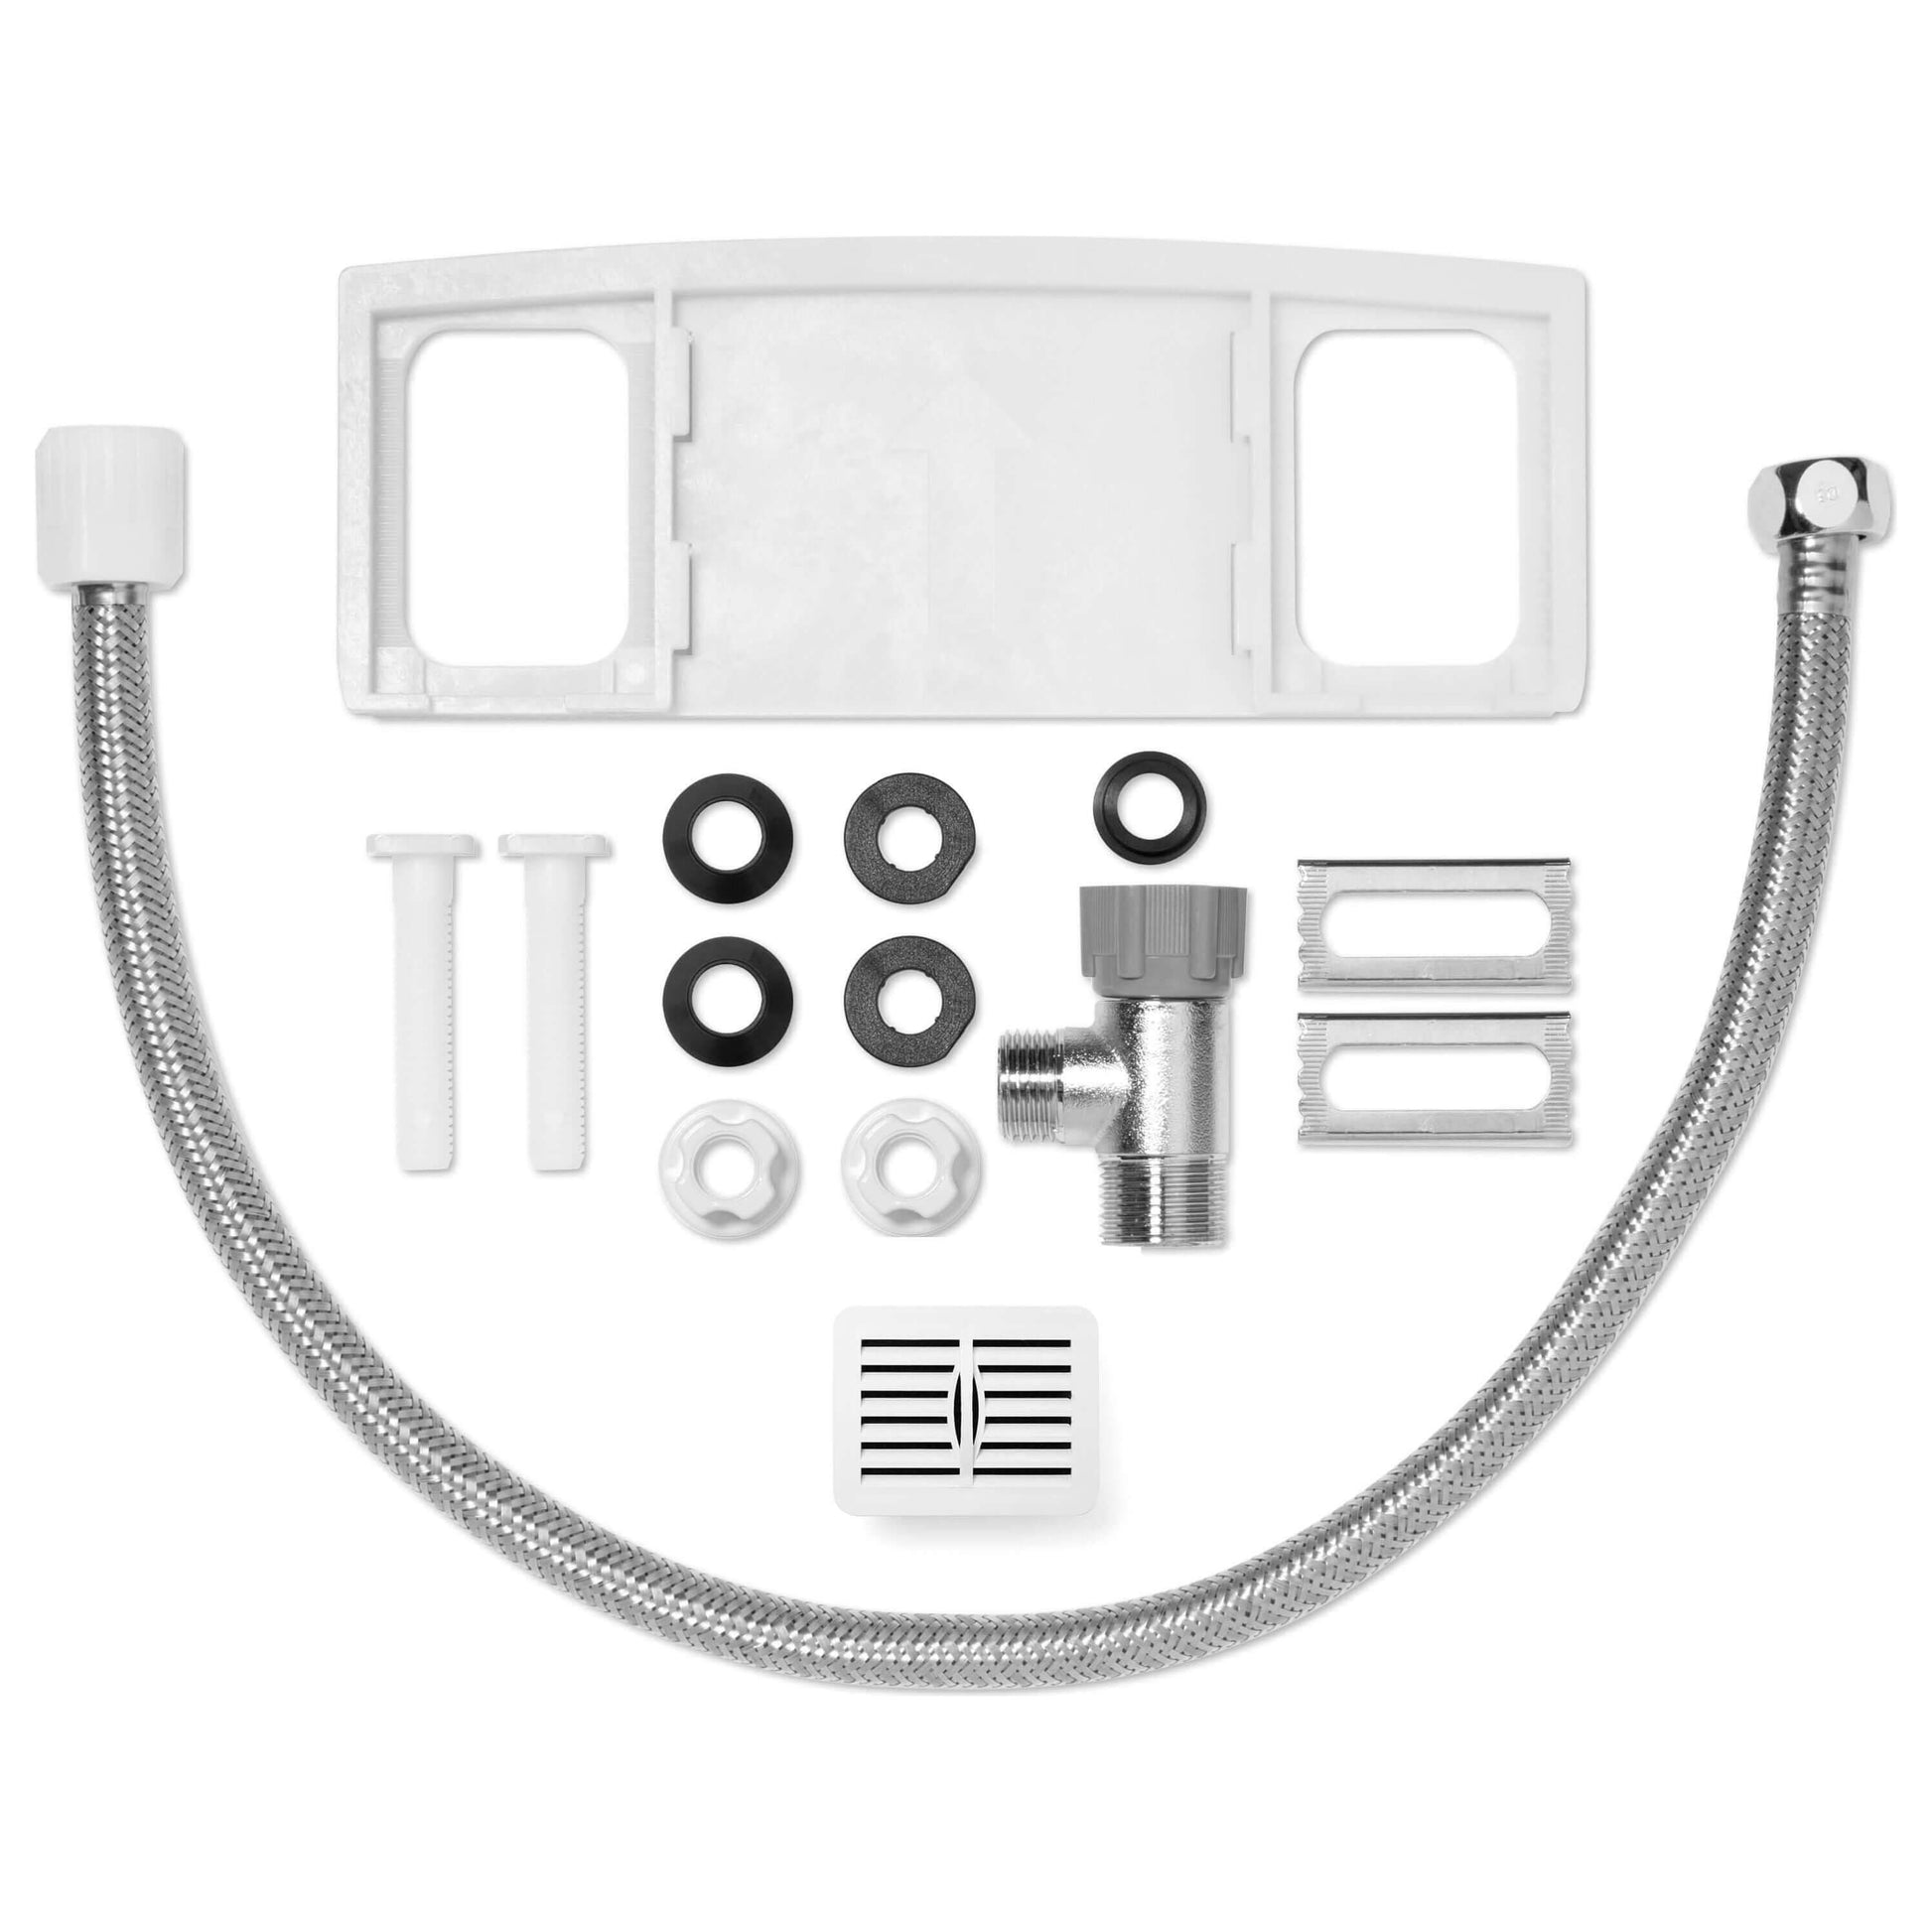 Swash Select DR801 Bidet Seat - top view of included parts